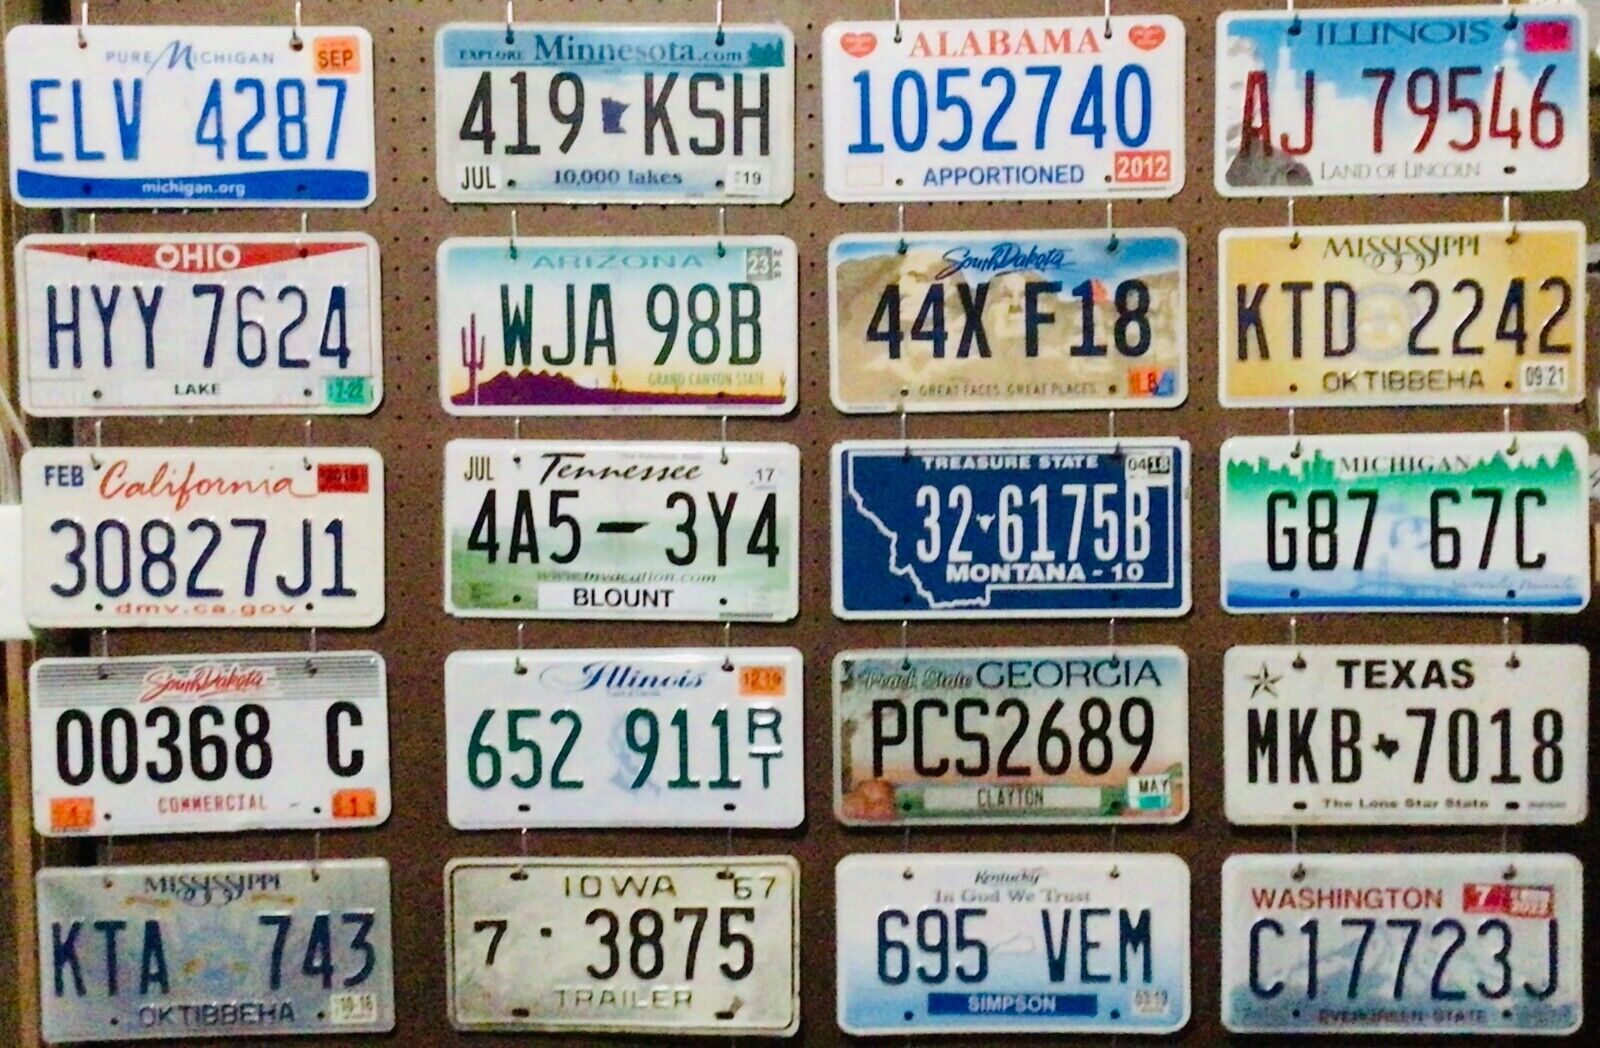 Large lot 20 bulk license plates -LOOK AT MY OTHER LOWER COST SHIPPING LISTINGS